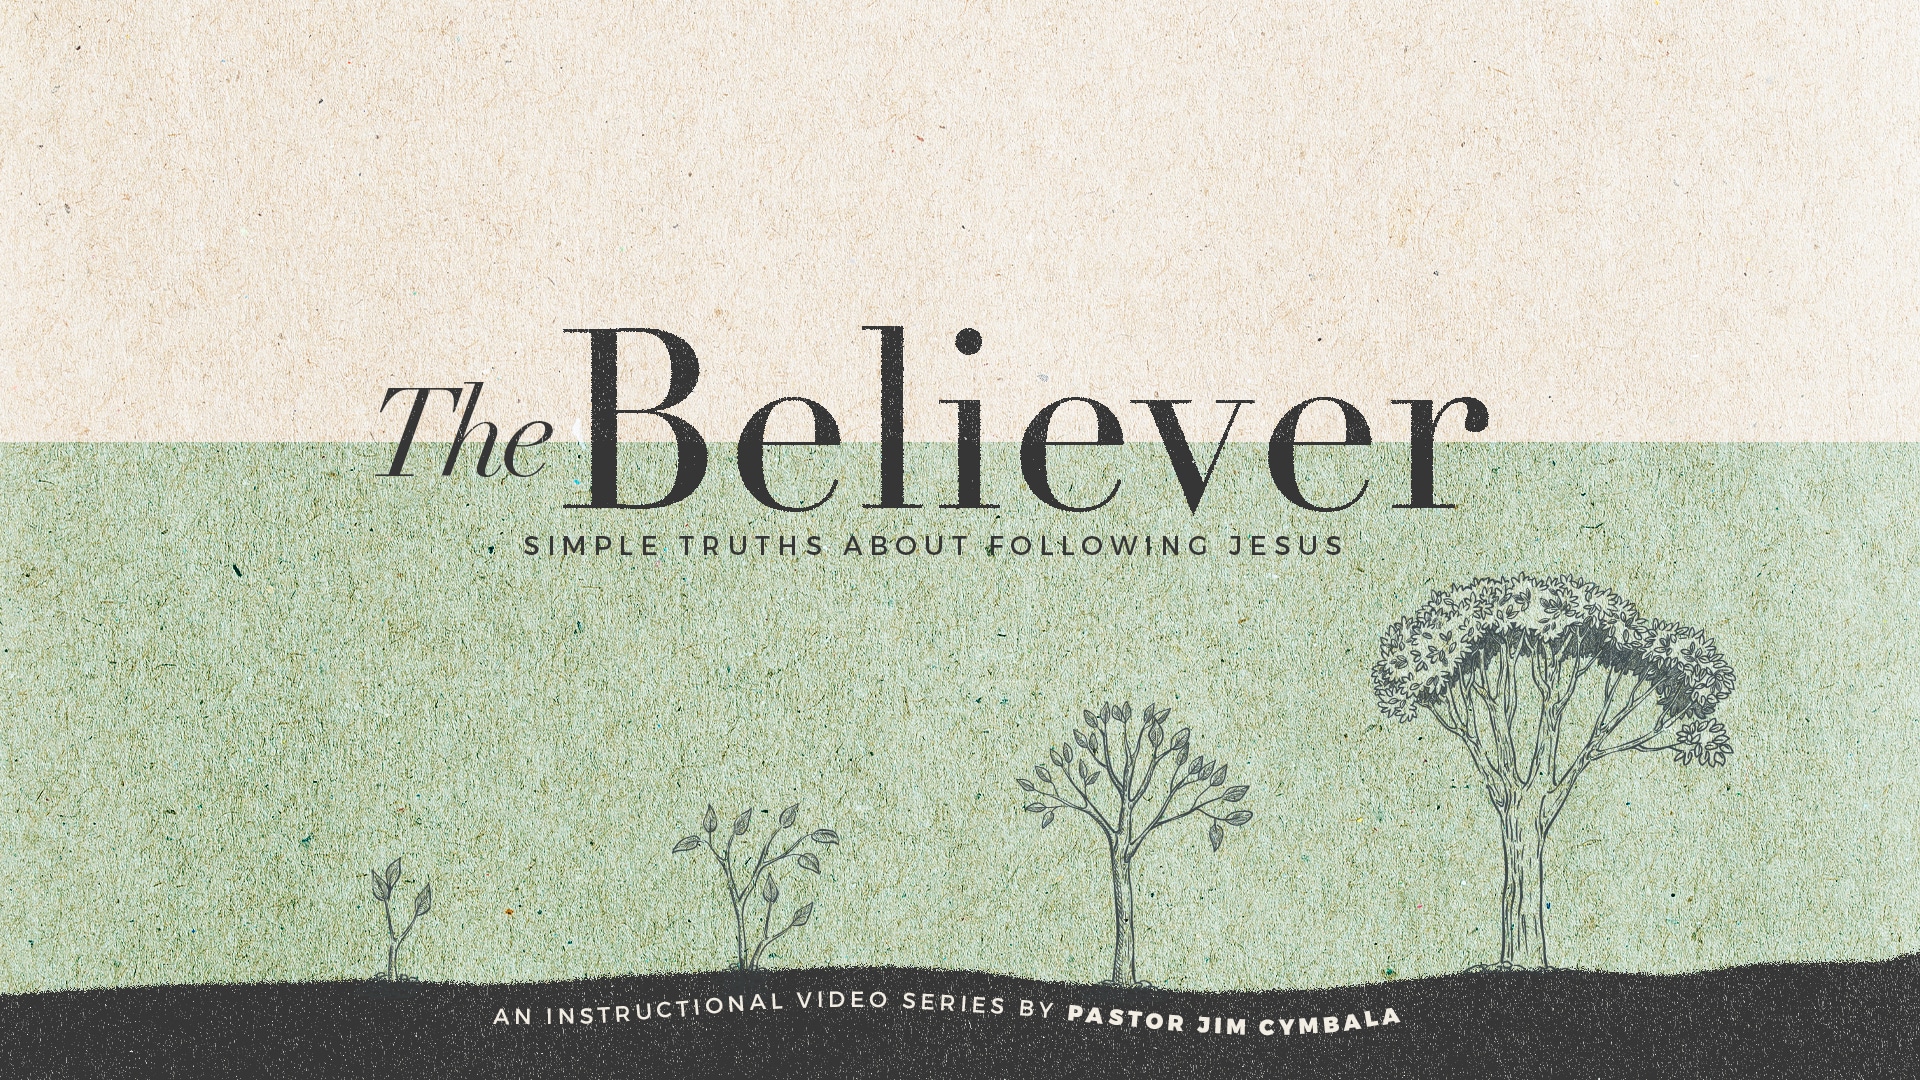 The Believer simple truths about following Jesus thumbnail